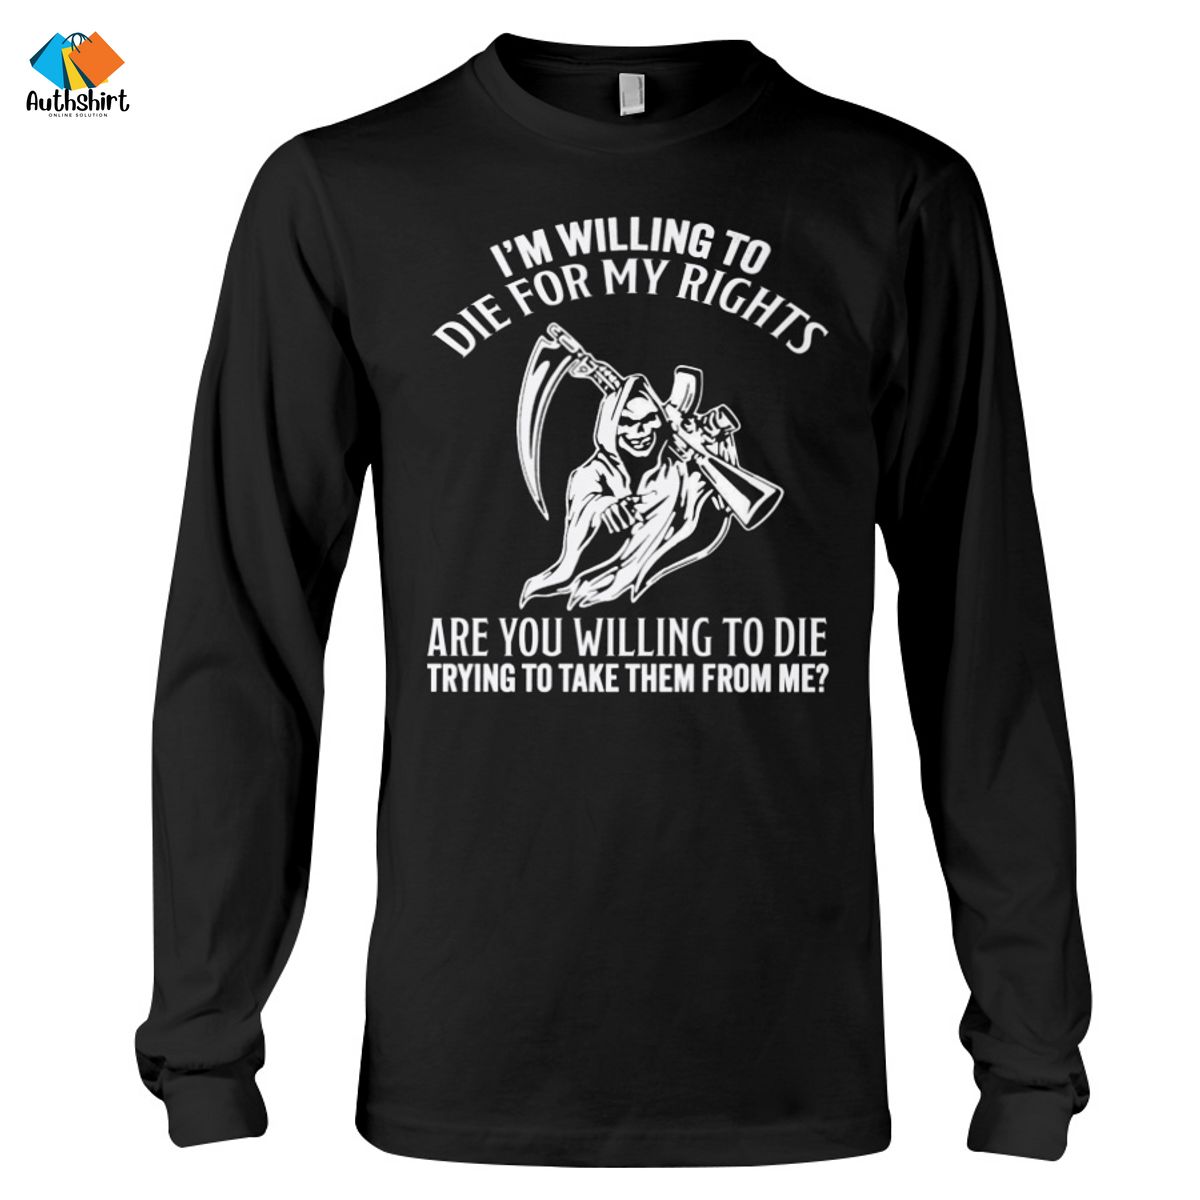 I’m Willing To Die For My Rights Are You Willing To Die Trying To Take Them From Me Shirt